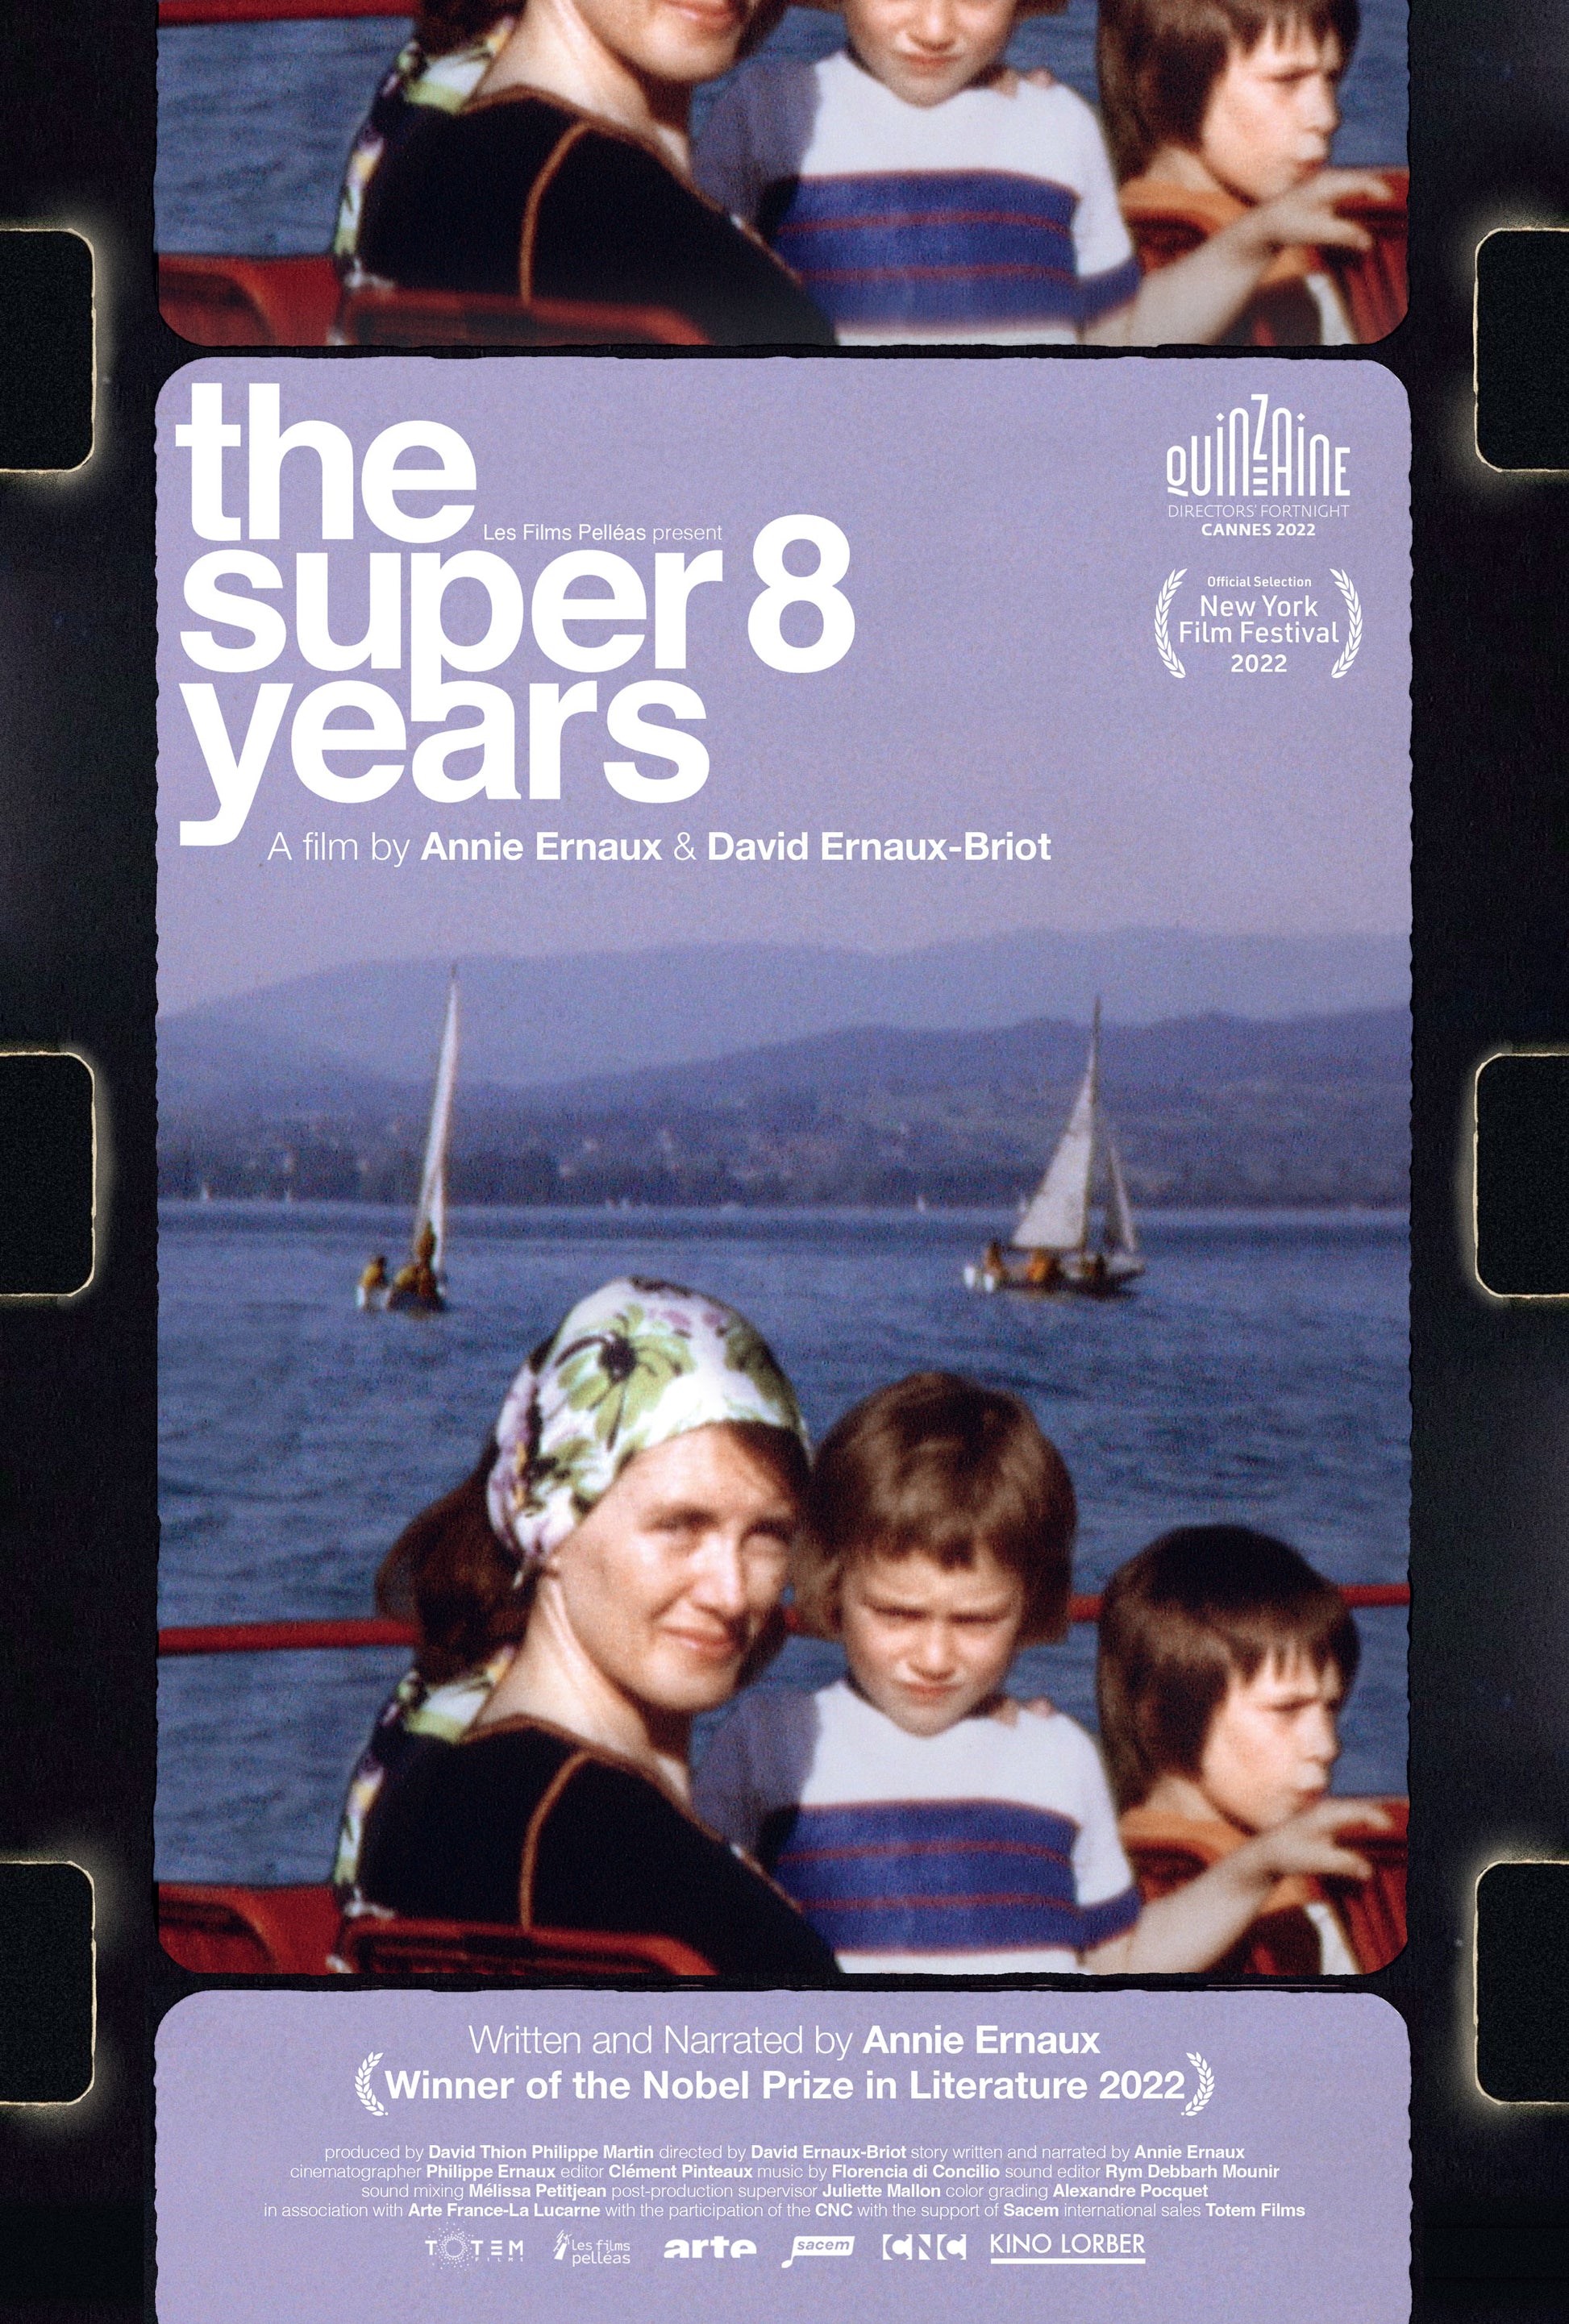 Super 8 Years cover art